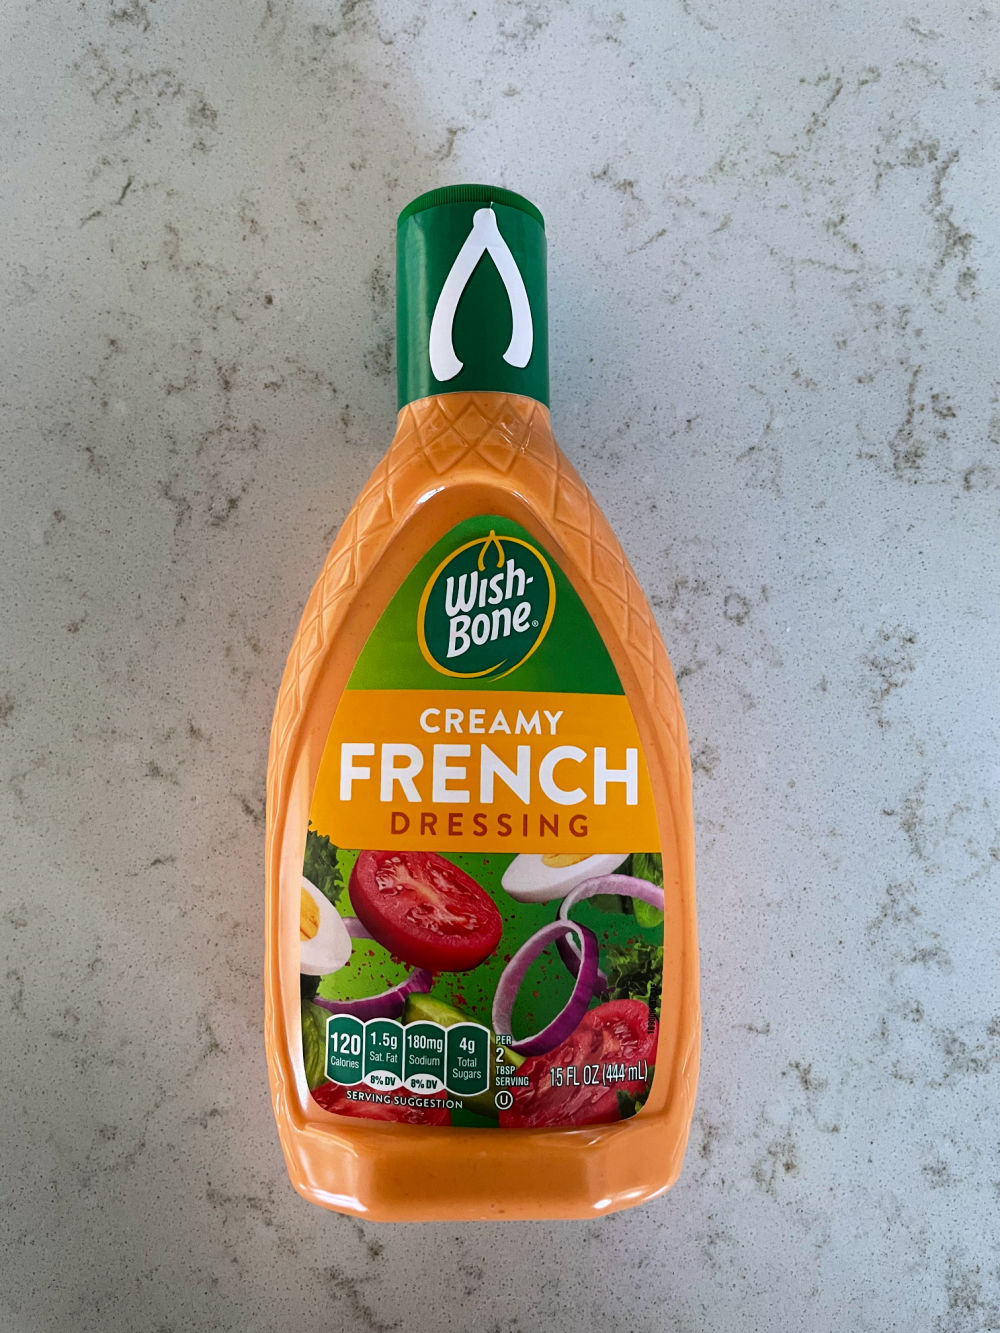 A bottle of creamy french dressing